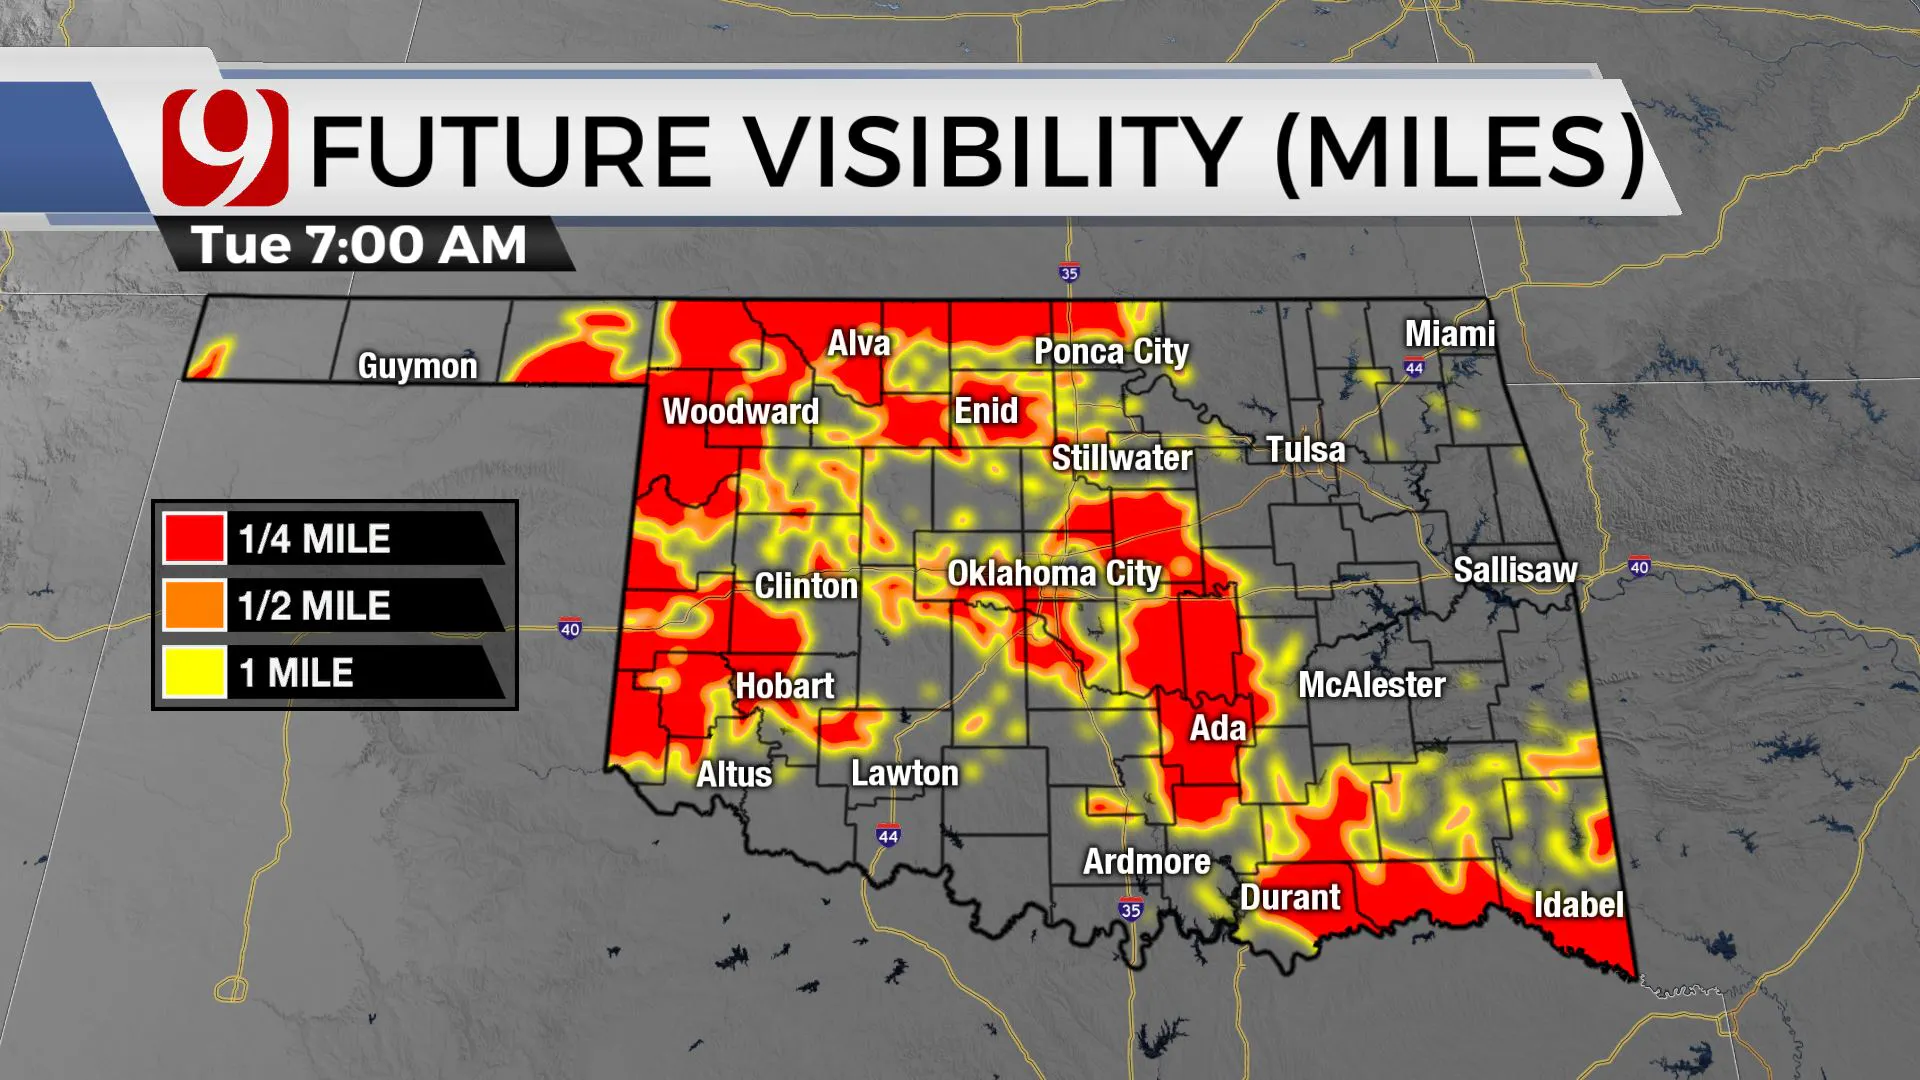 Visibility levels across the state.